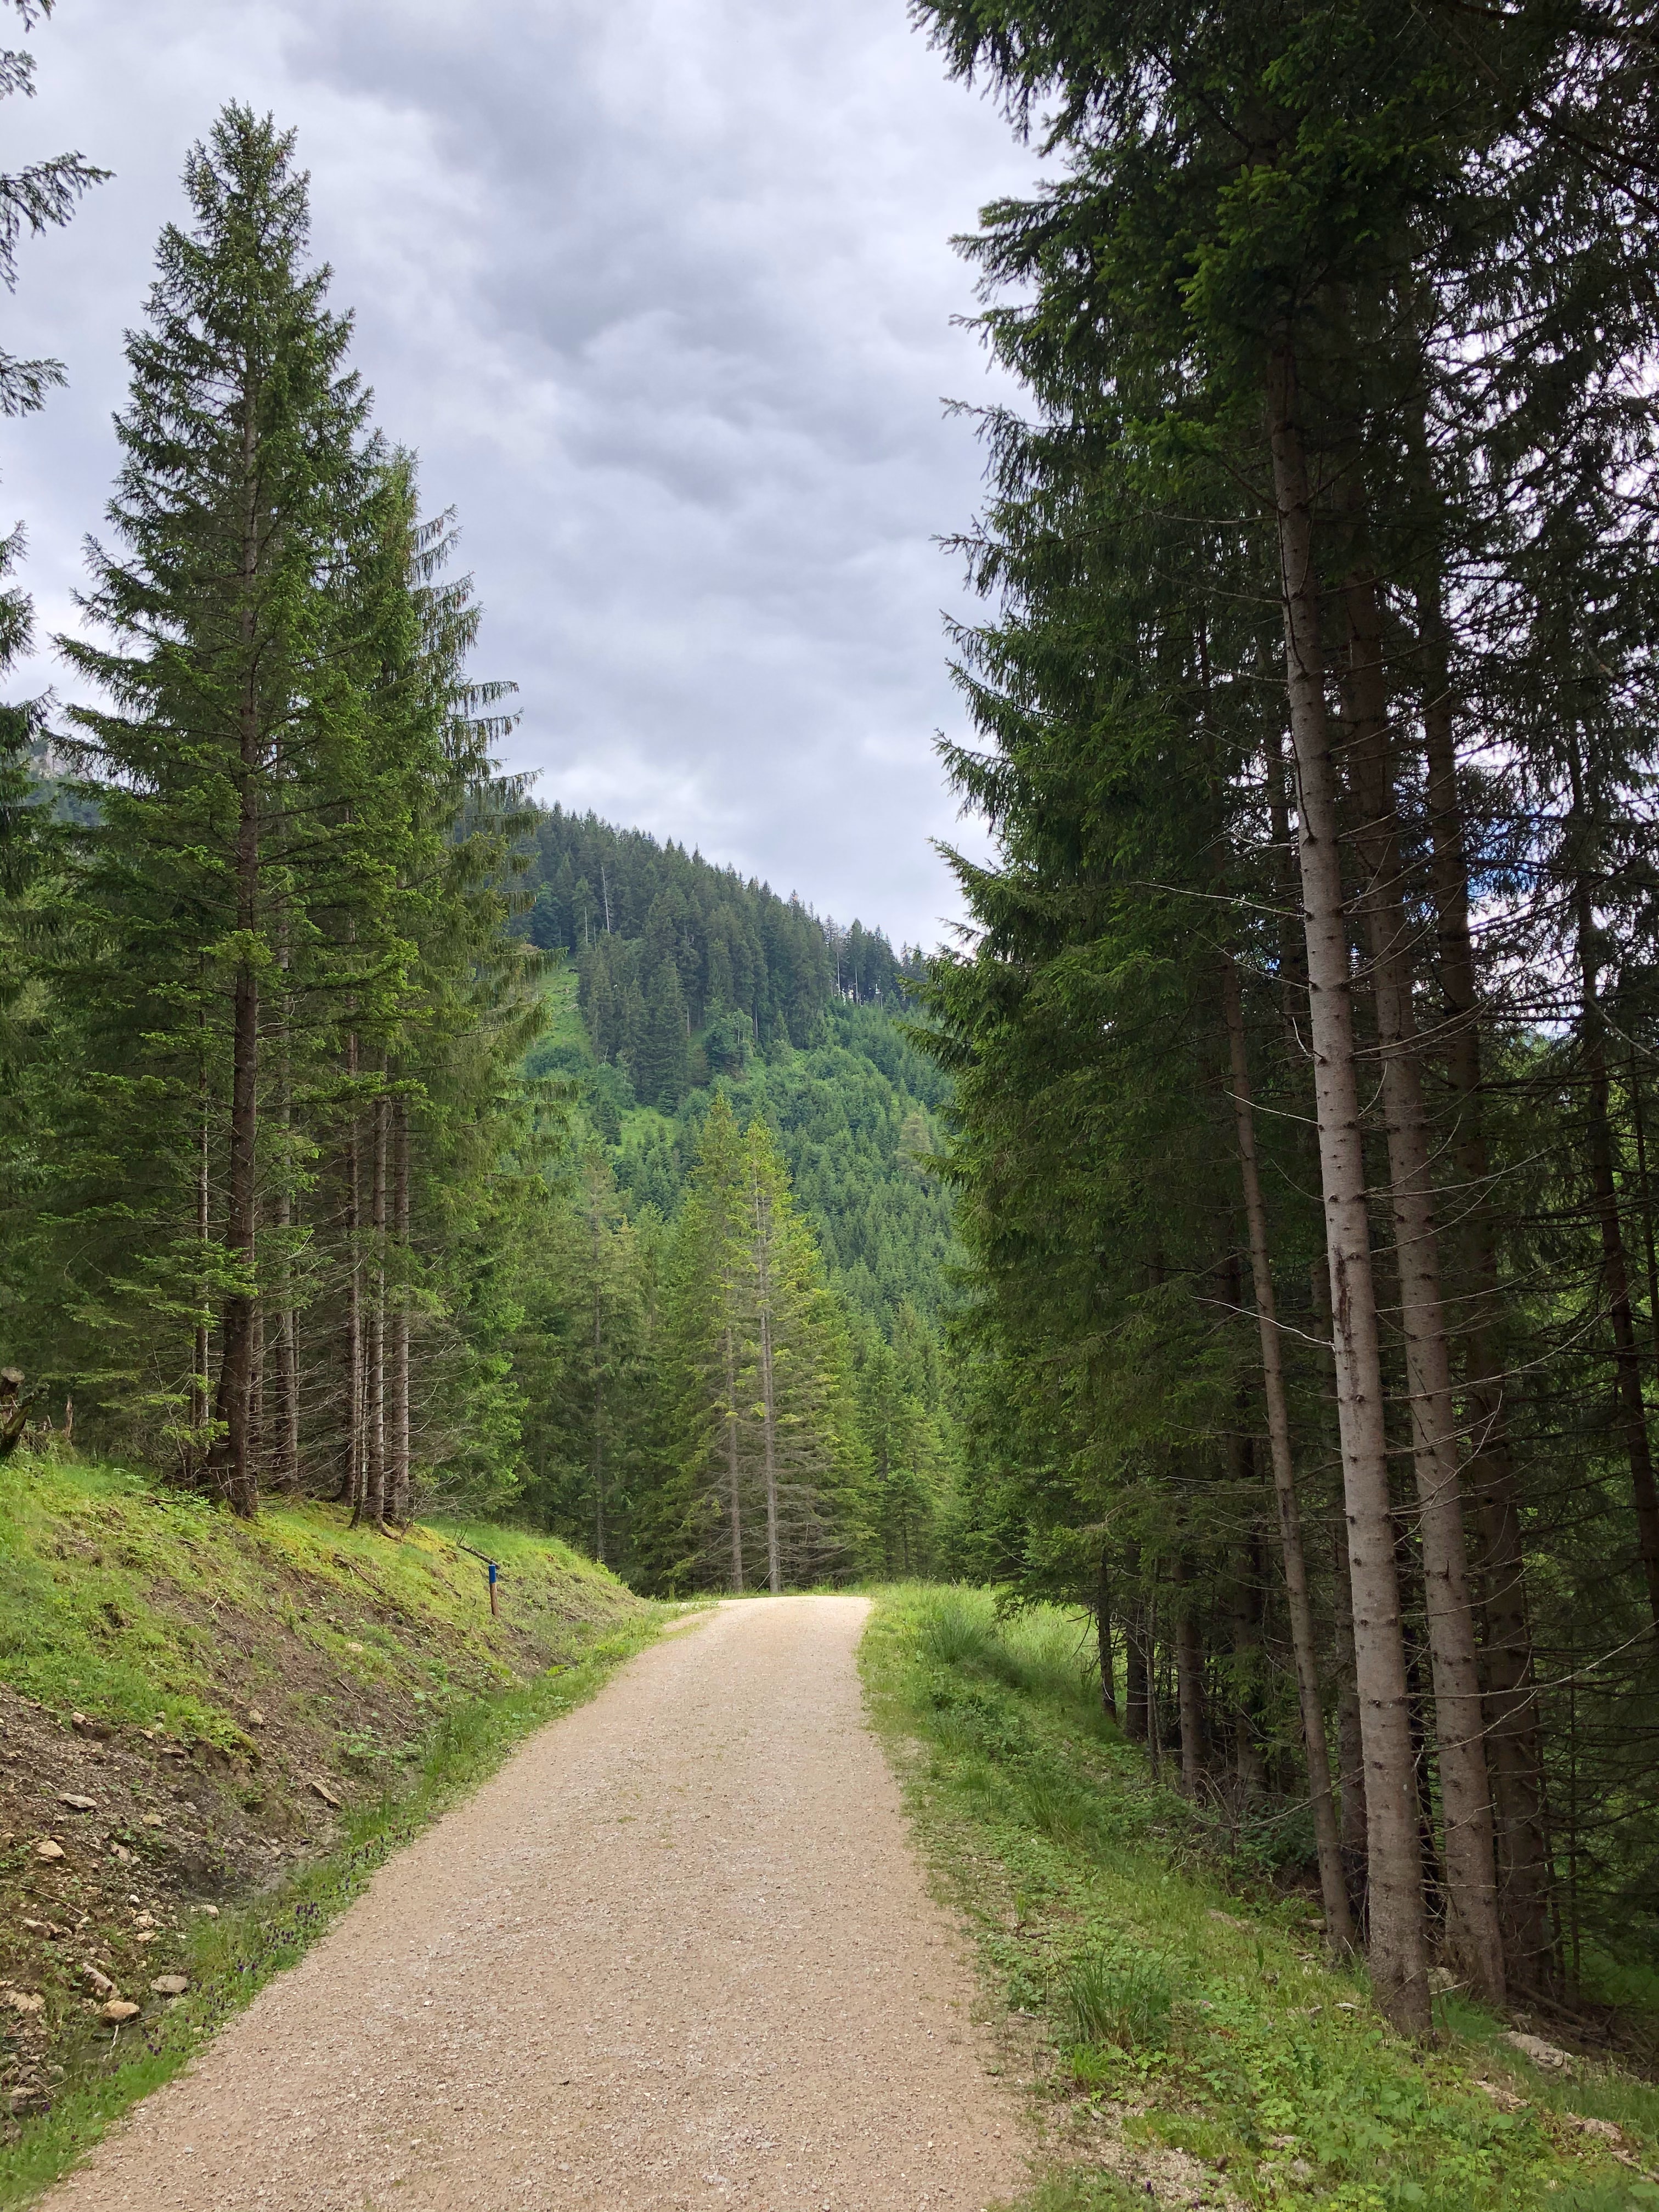 dahl, trees, nature, road, forest, spruce, fir, distance images